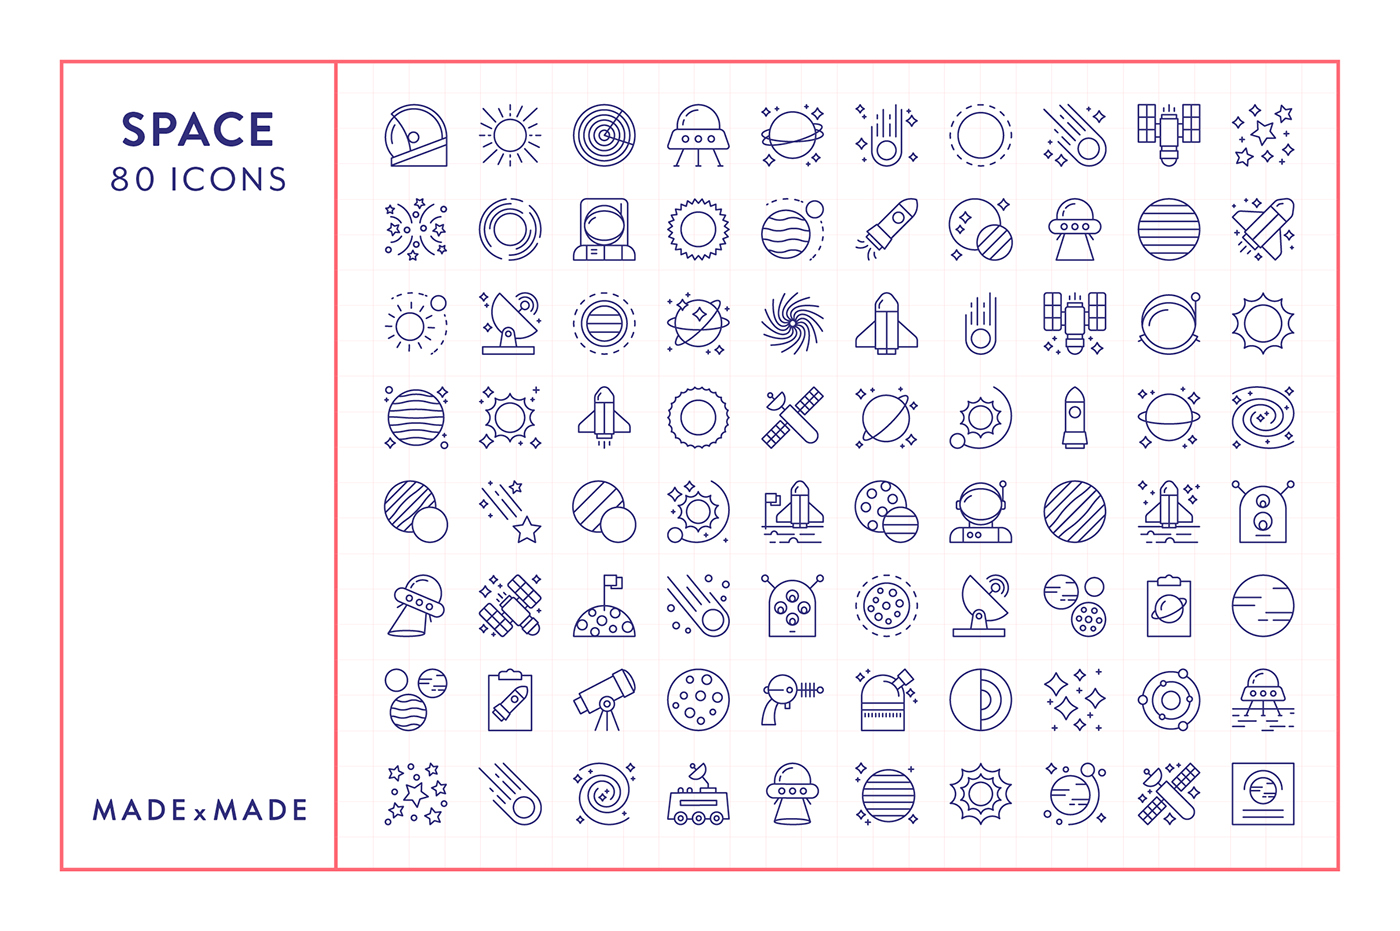 ILLUSTRATION  iconography icons infographic UI ux graphics drawings Space  sci-fi